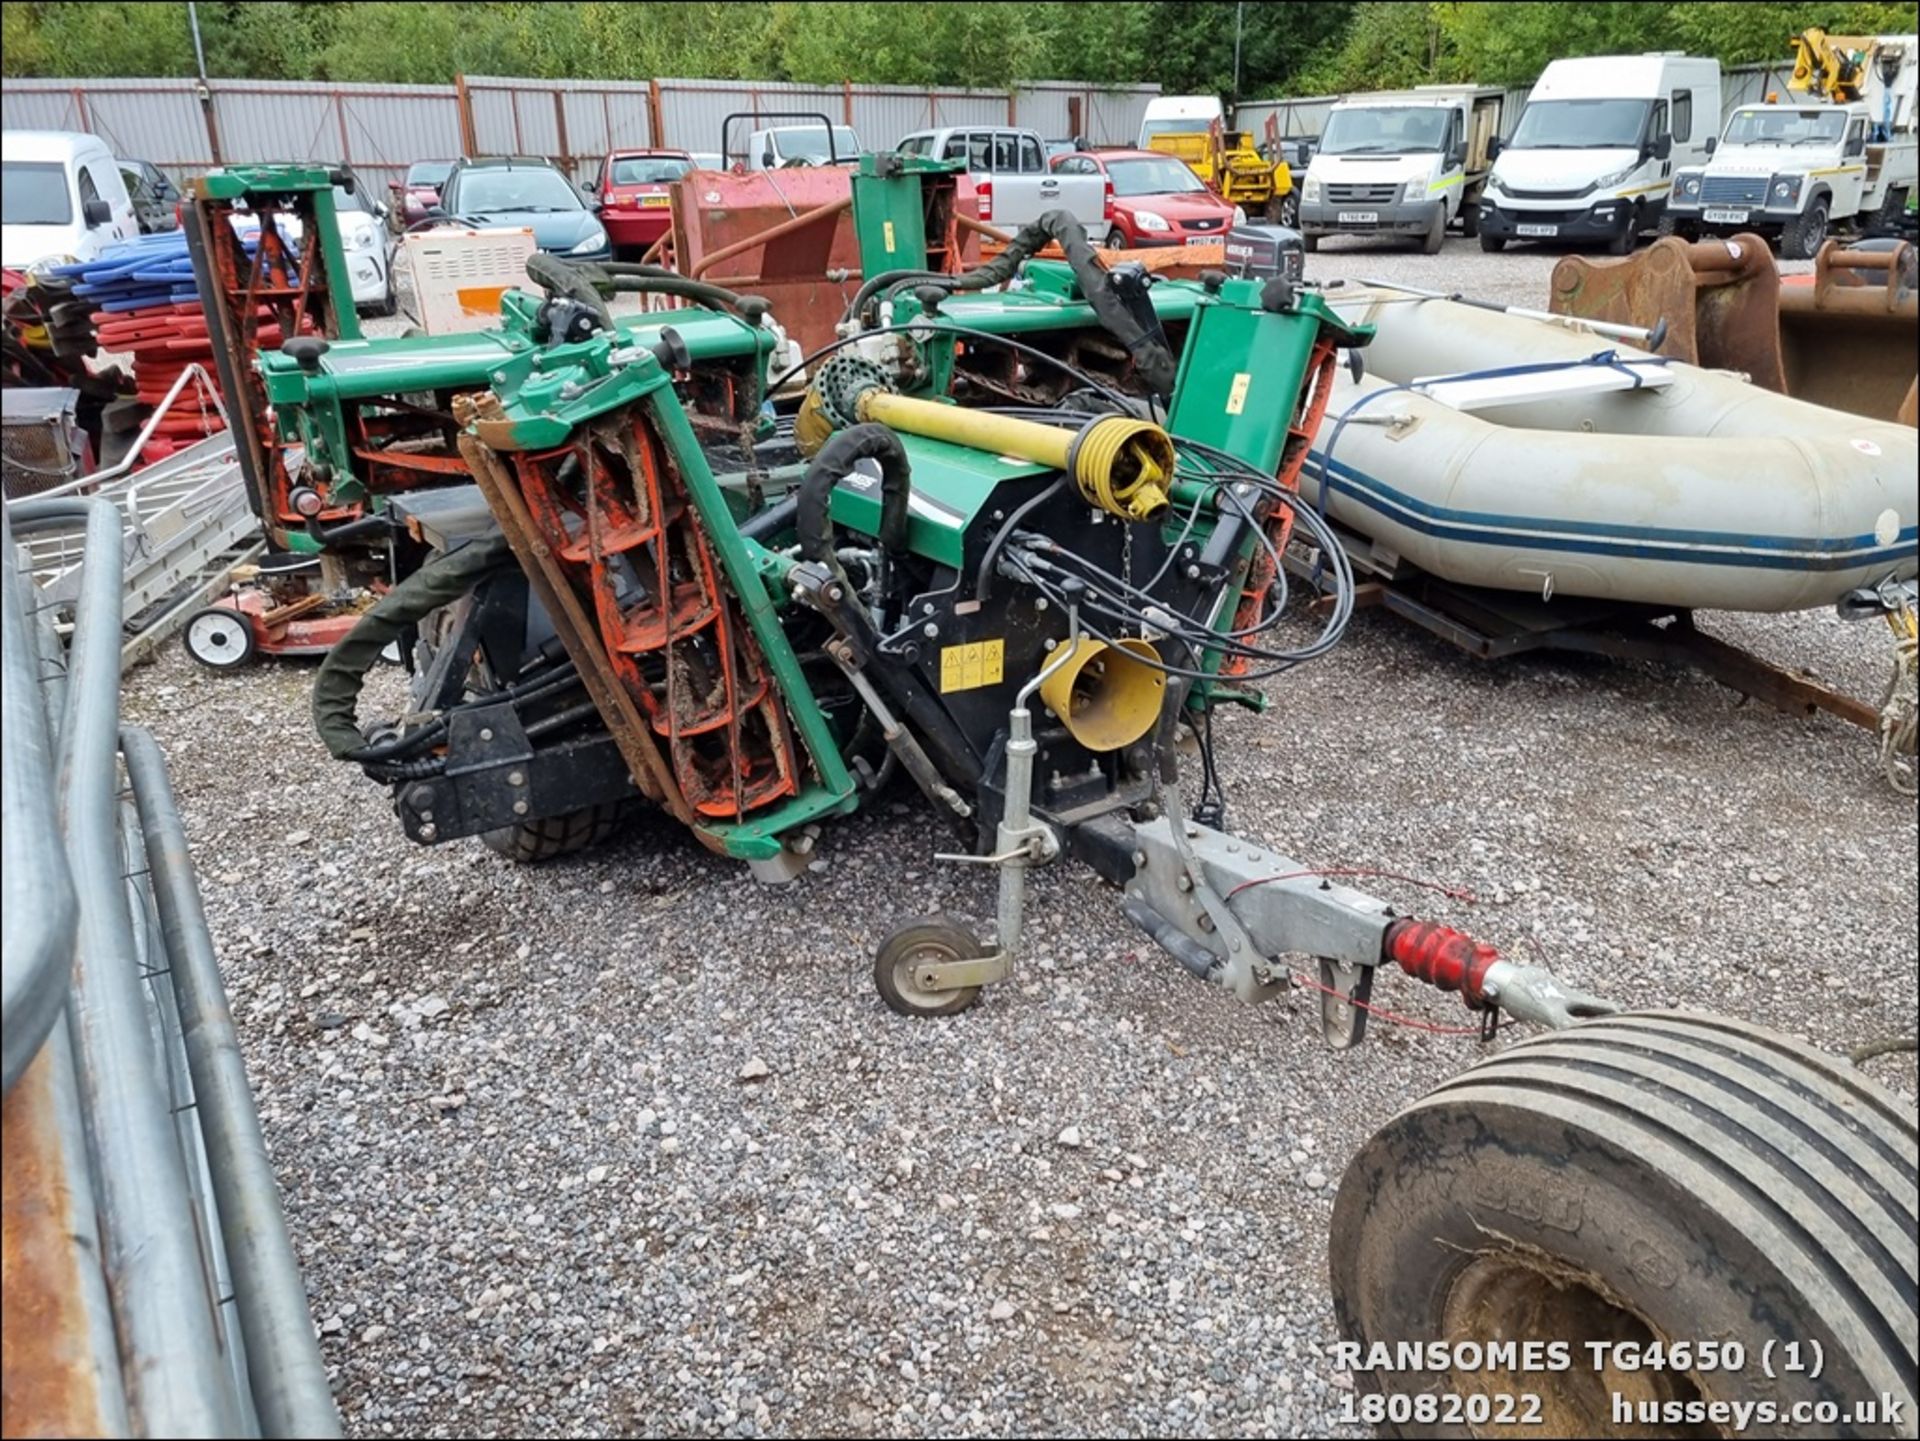 RANSOMES MAGNA 250 TRAILED GANG MOWER